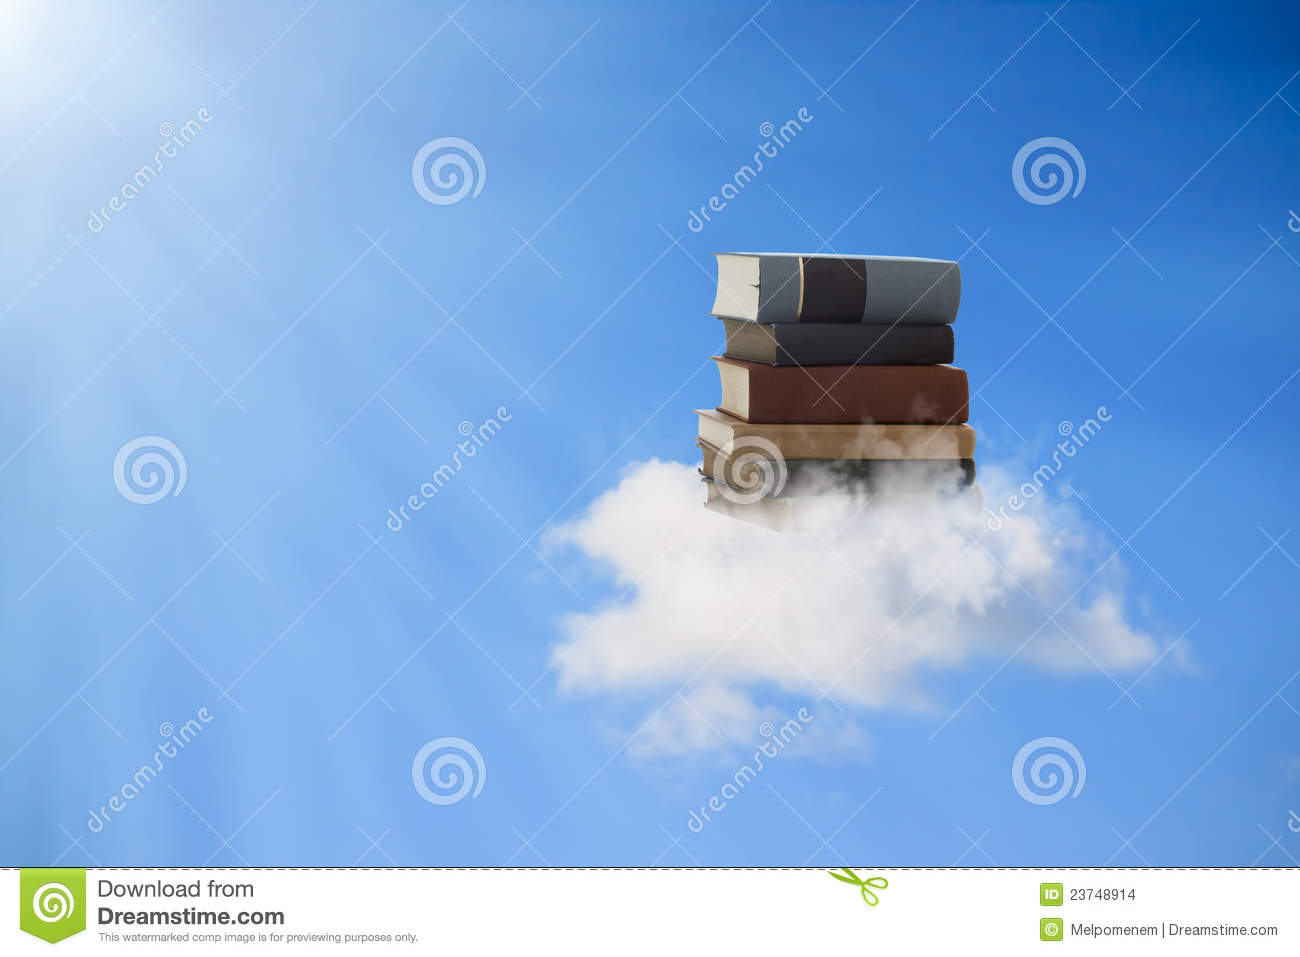 Beautiful Books Floating On A Cloud  Concepts Of Reading Education